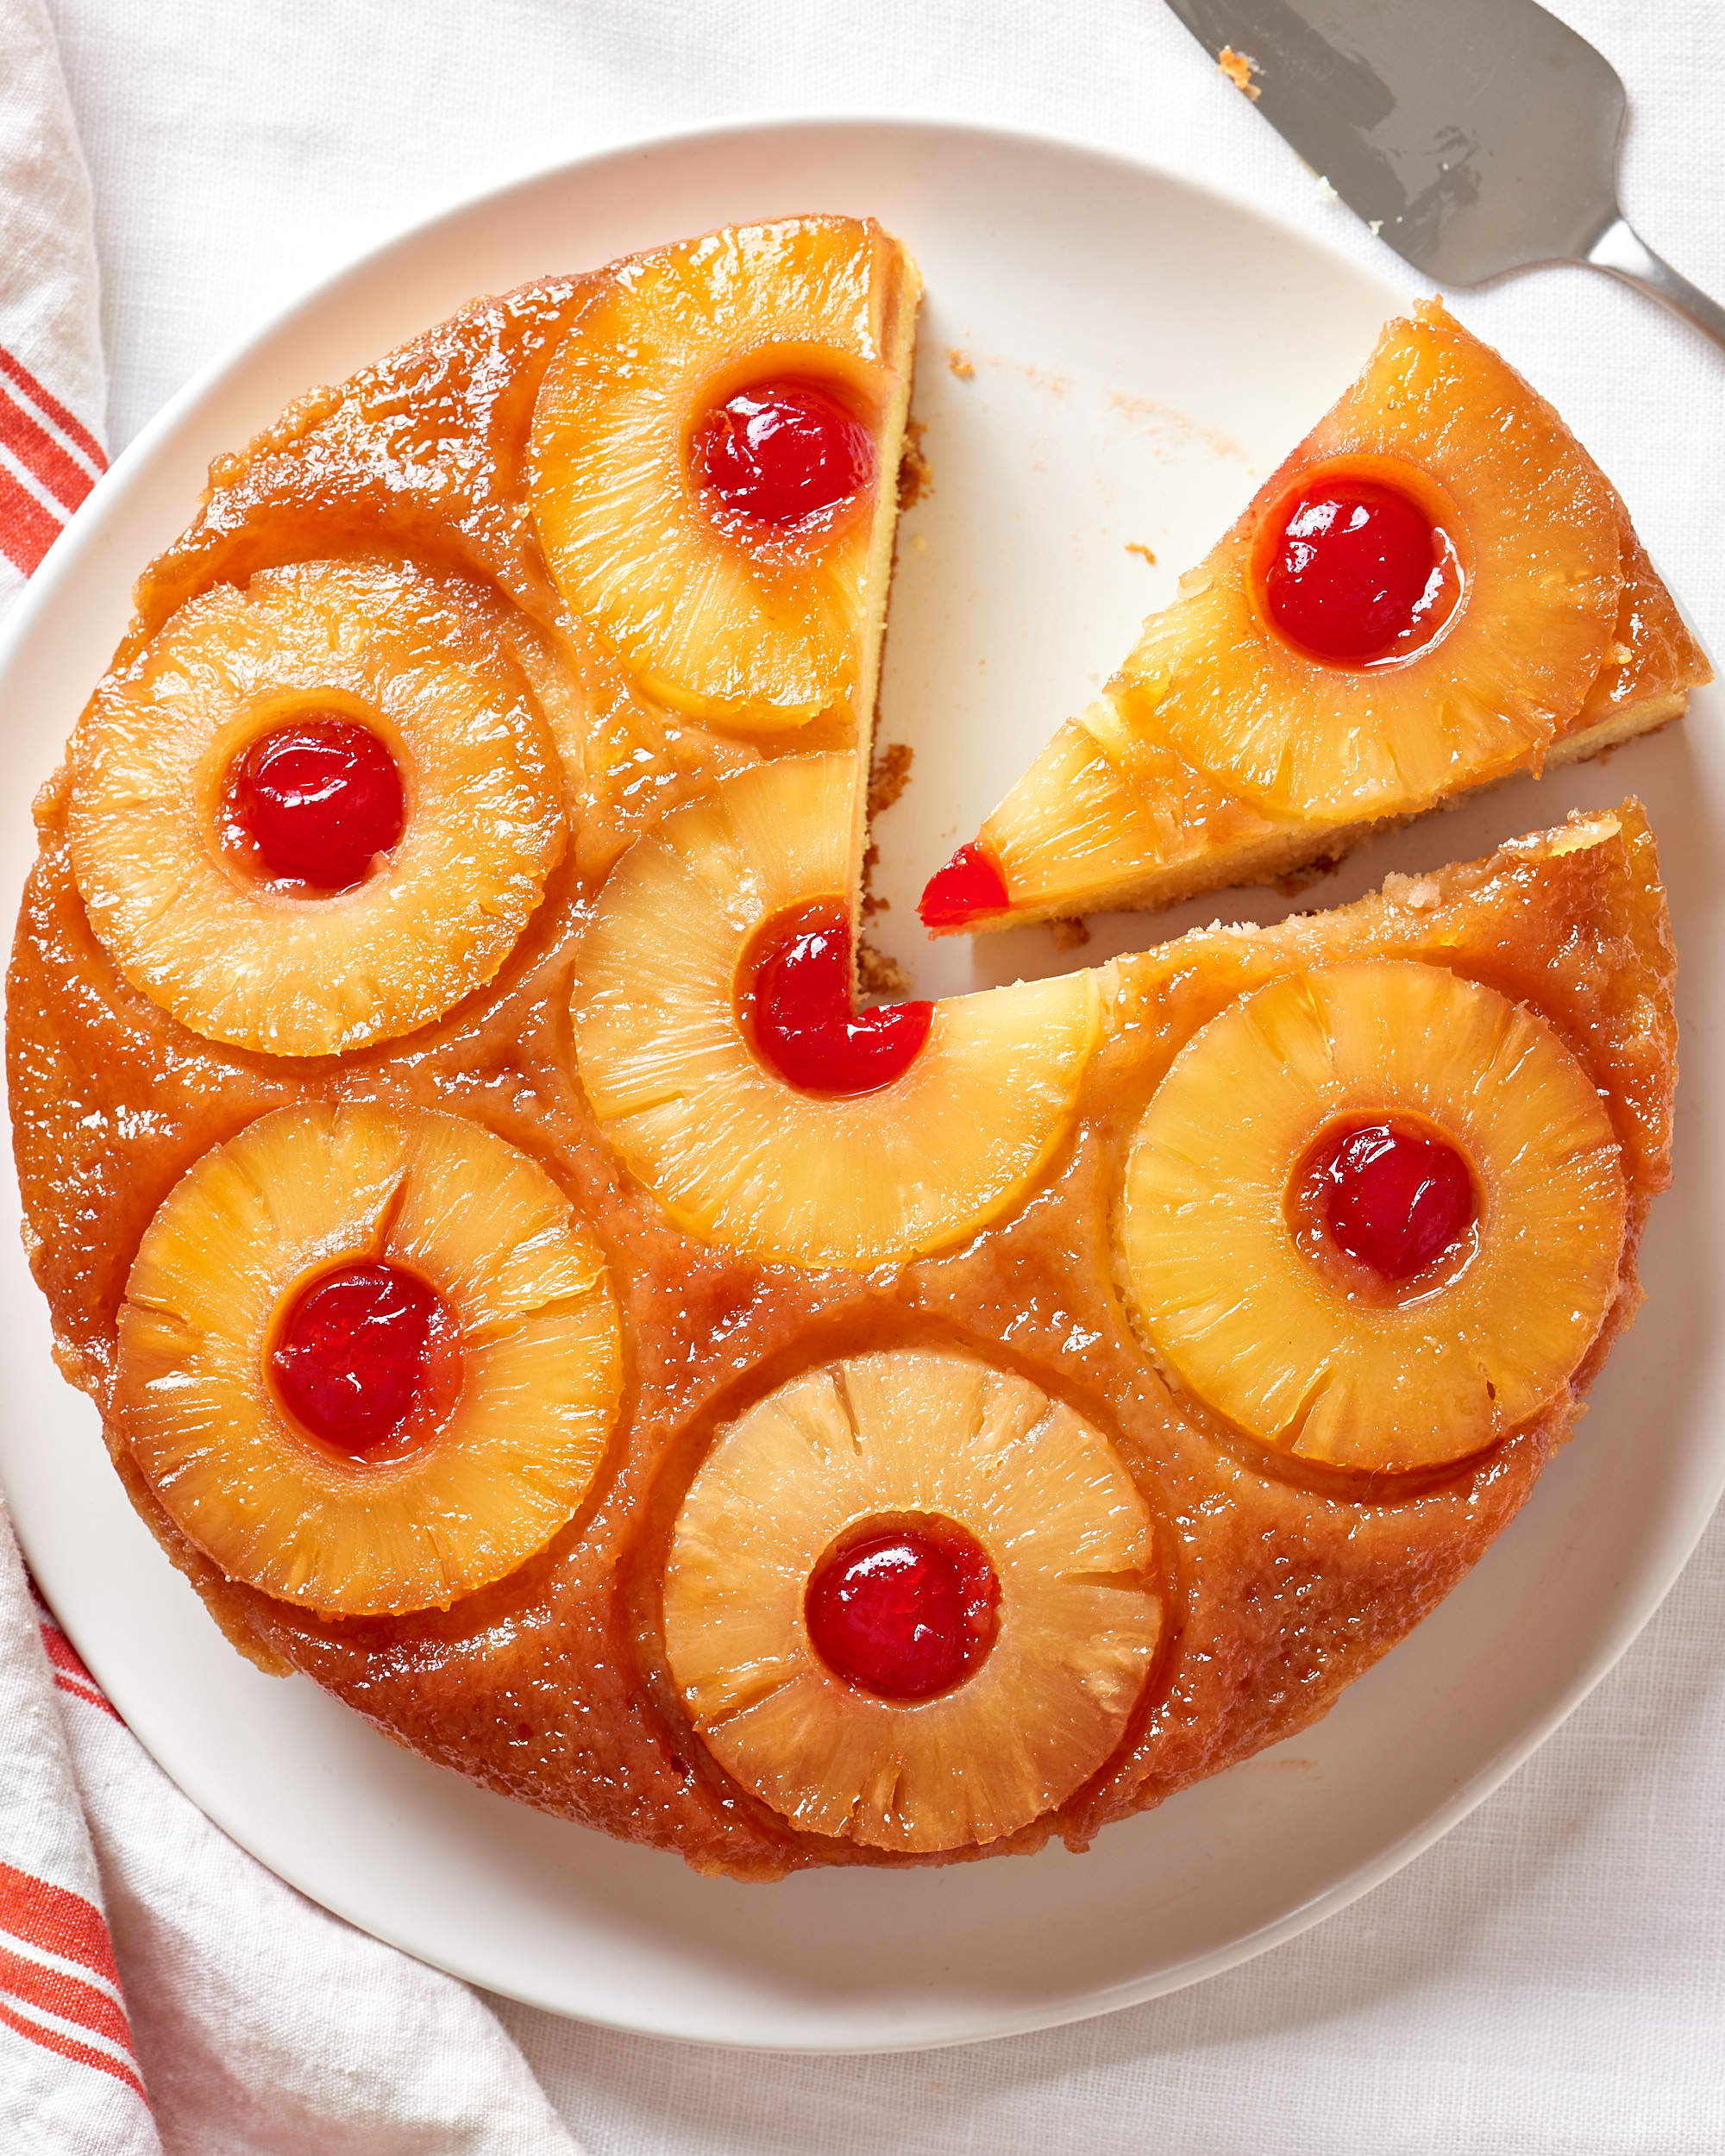 Pineapple Upside-Down Cake Recipe (Top-Rated!)